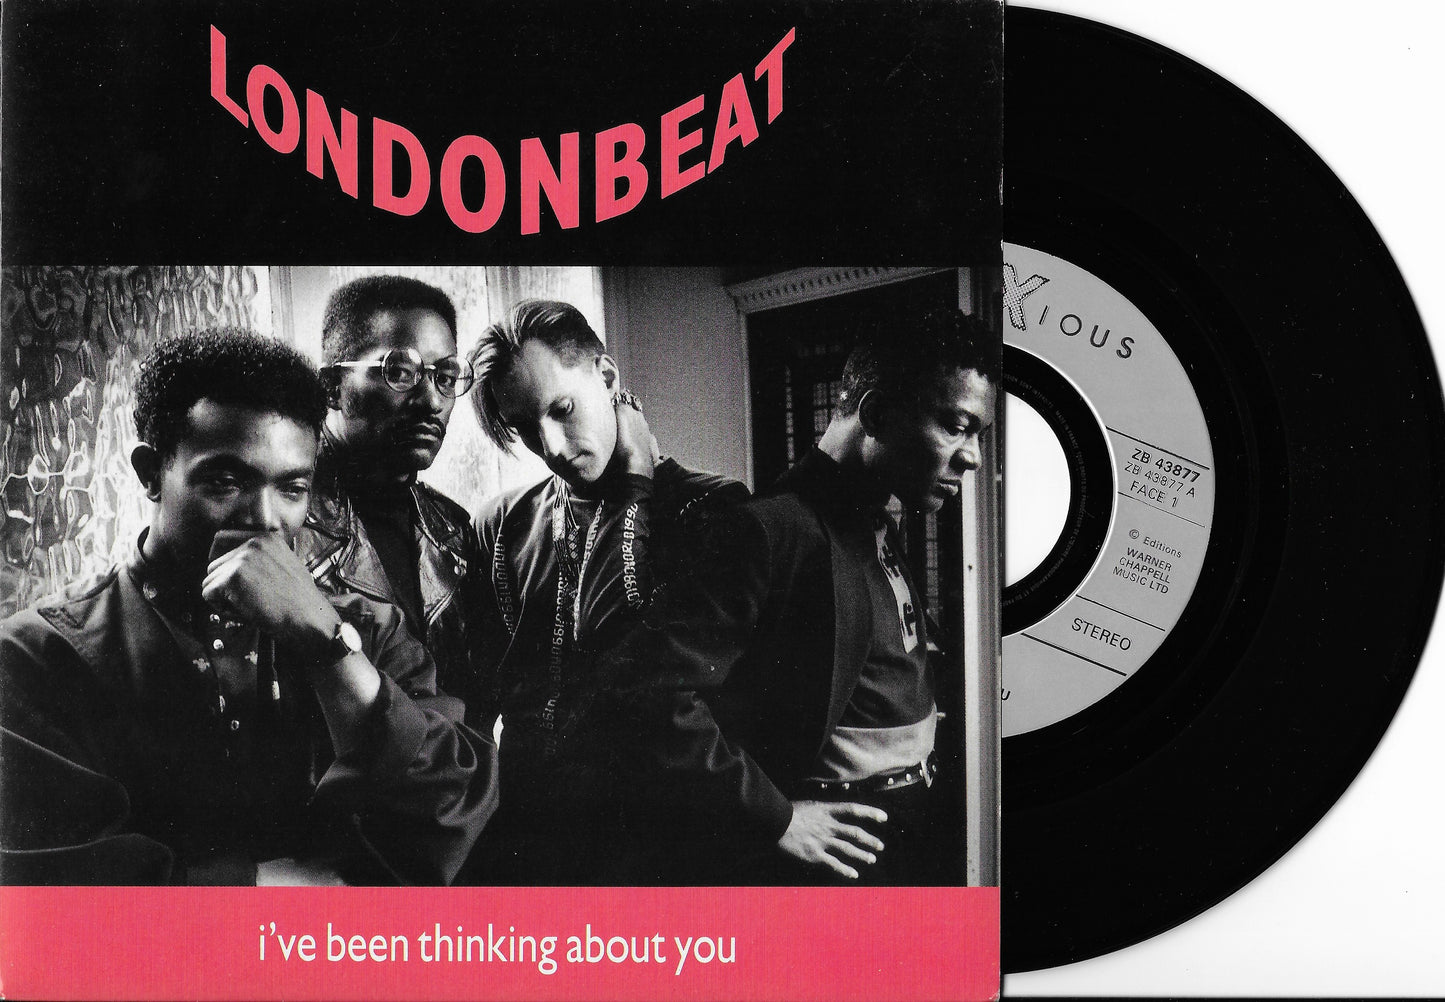 LONDON BEAT - I've Been Thinking About You